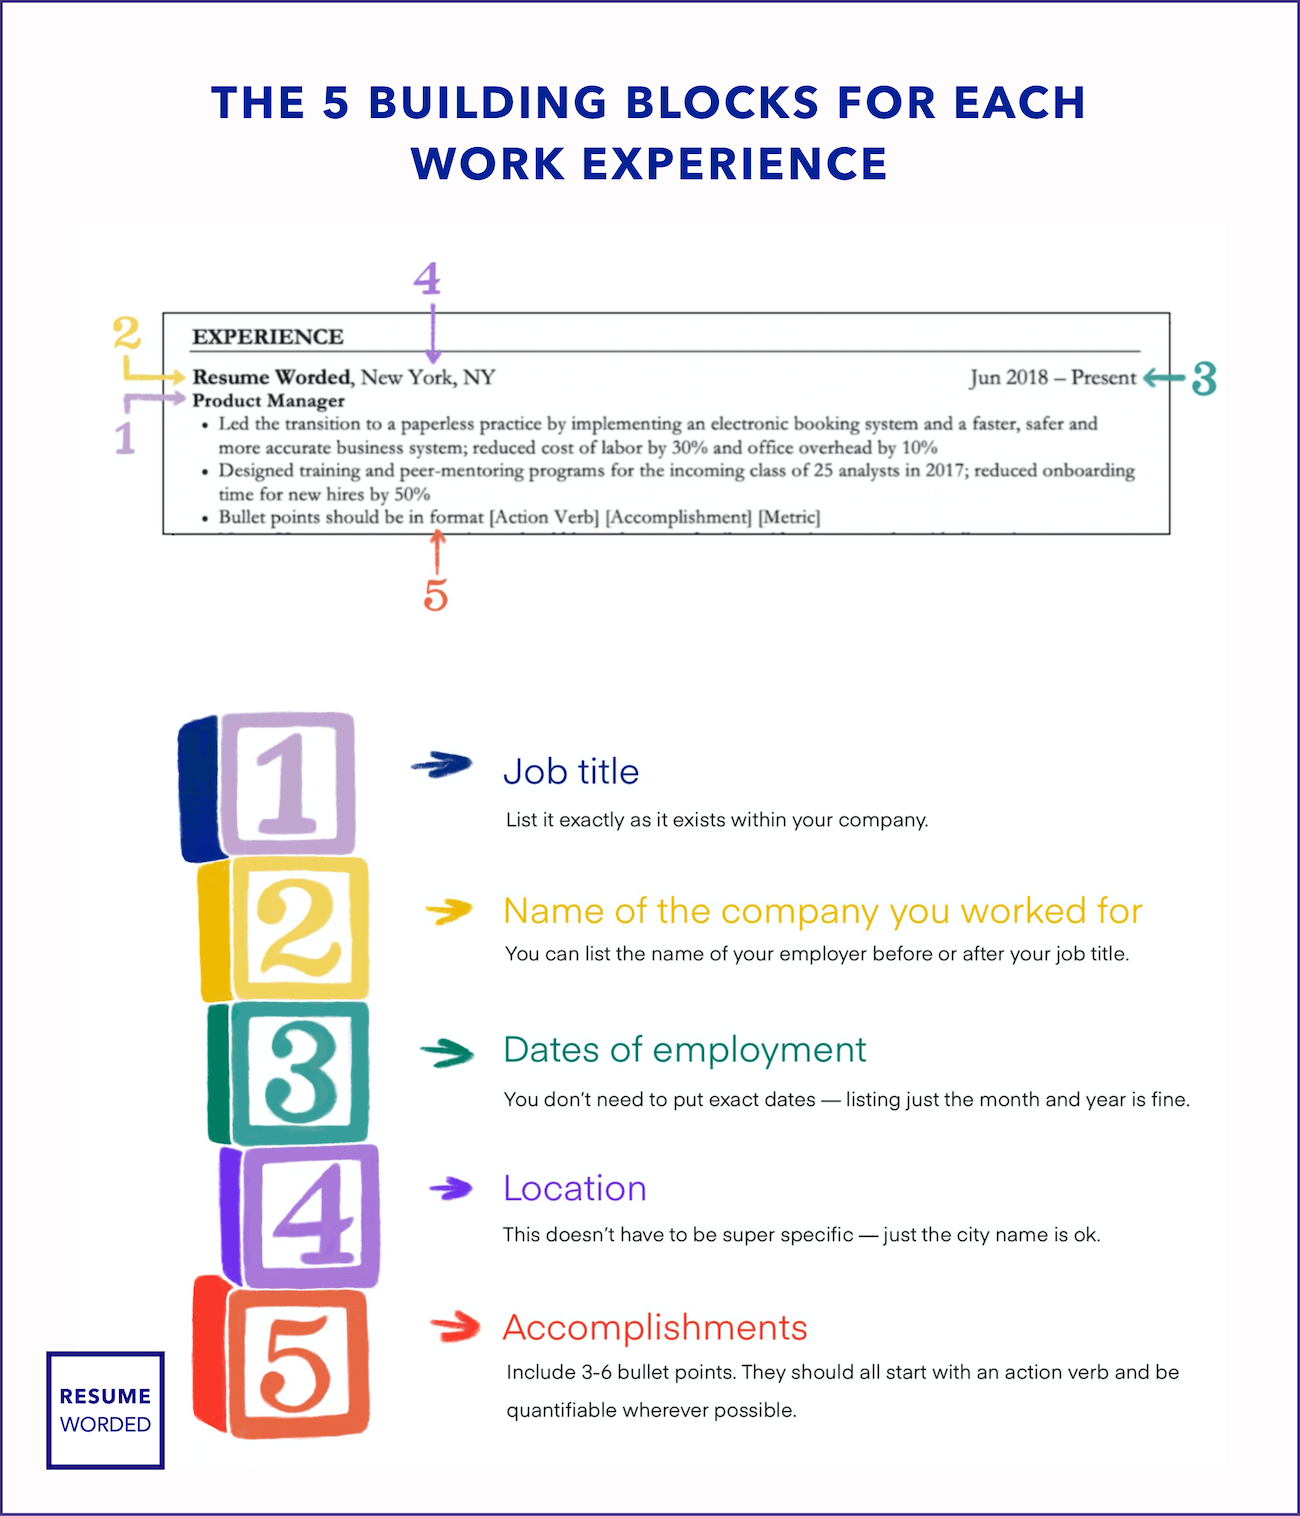 Related job experience is applied to current QA career path - Quality Assurance Tester Resume